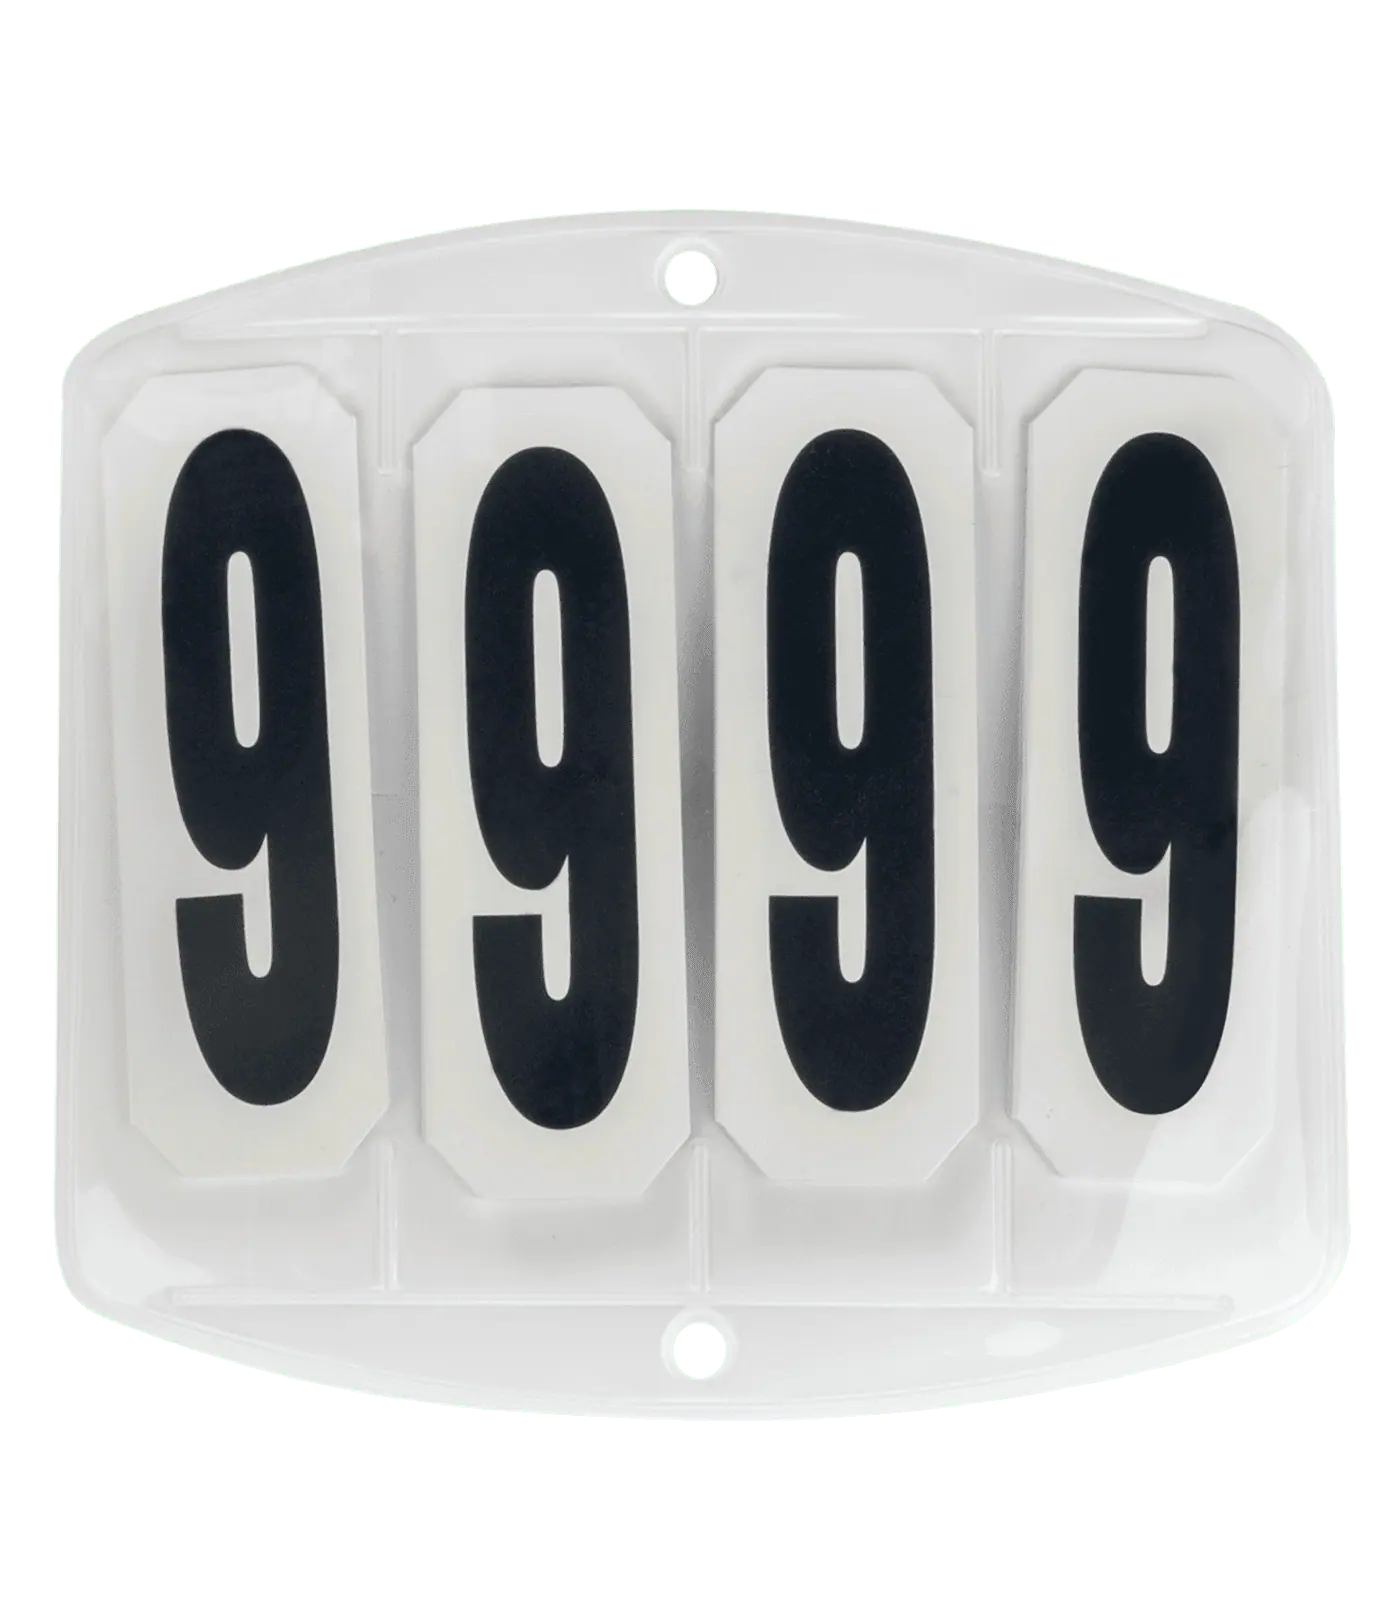 Saddle Pad Competition Numbers, square, with touch tape attachment white three digits